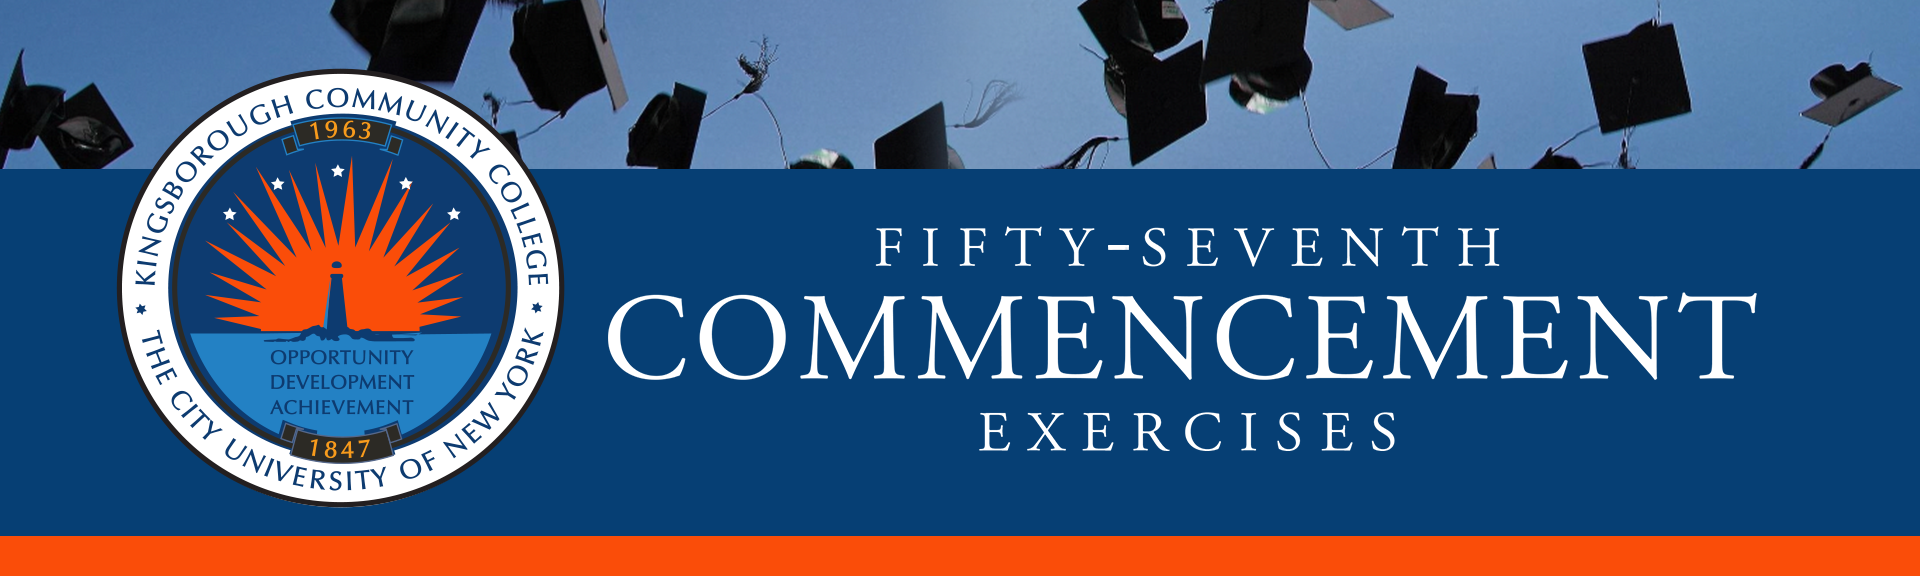 57th COMMENCEMENT